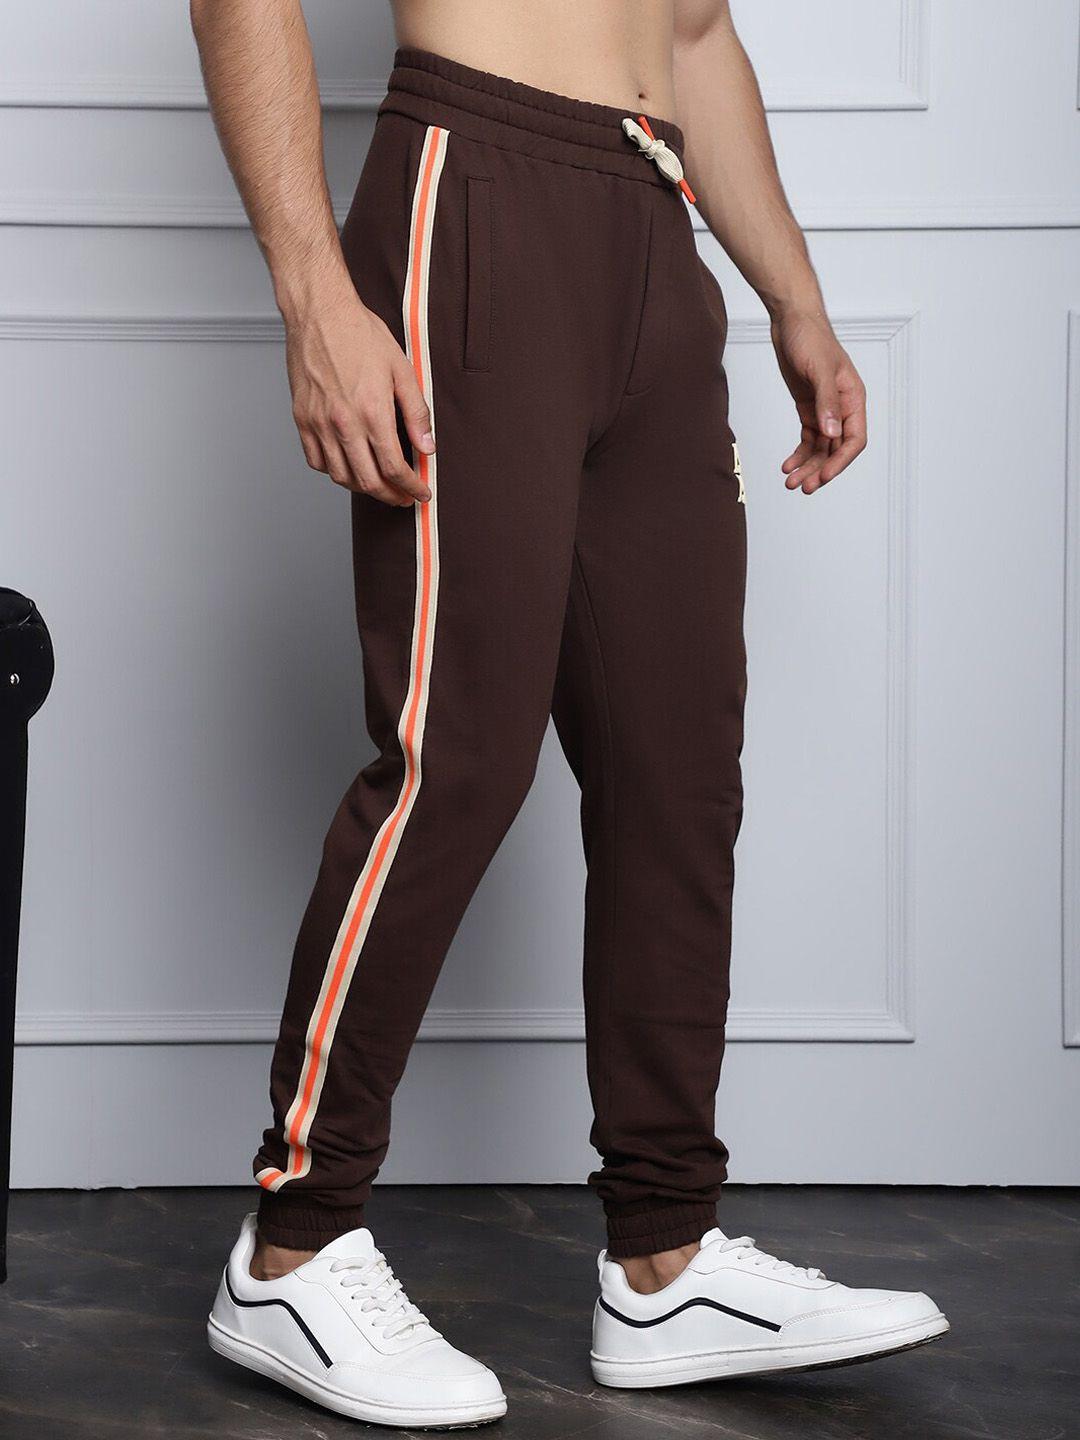 door74 mid-rise with side tape cotton joggers